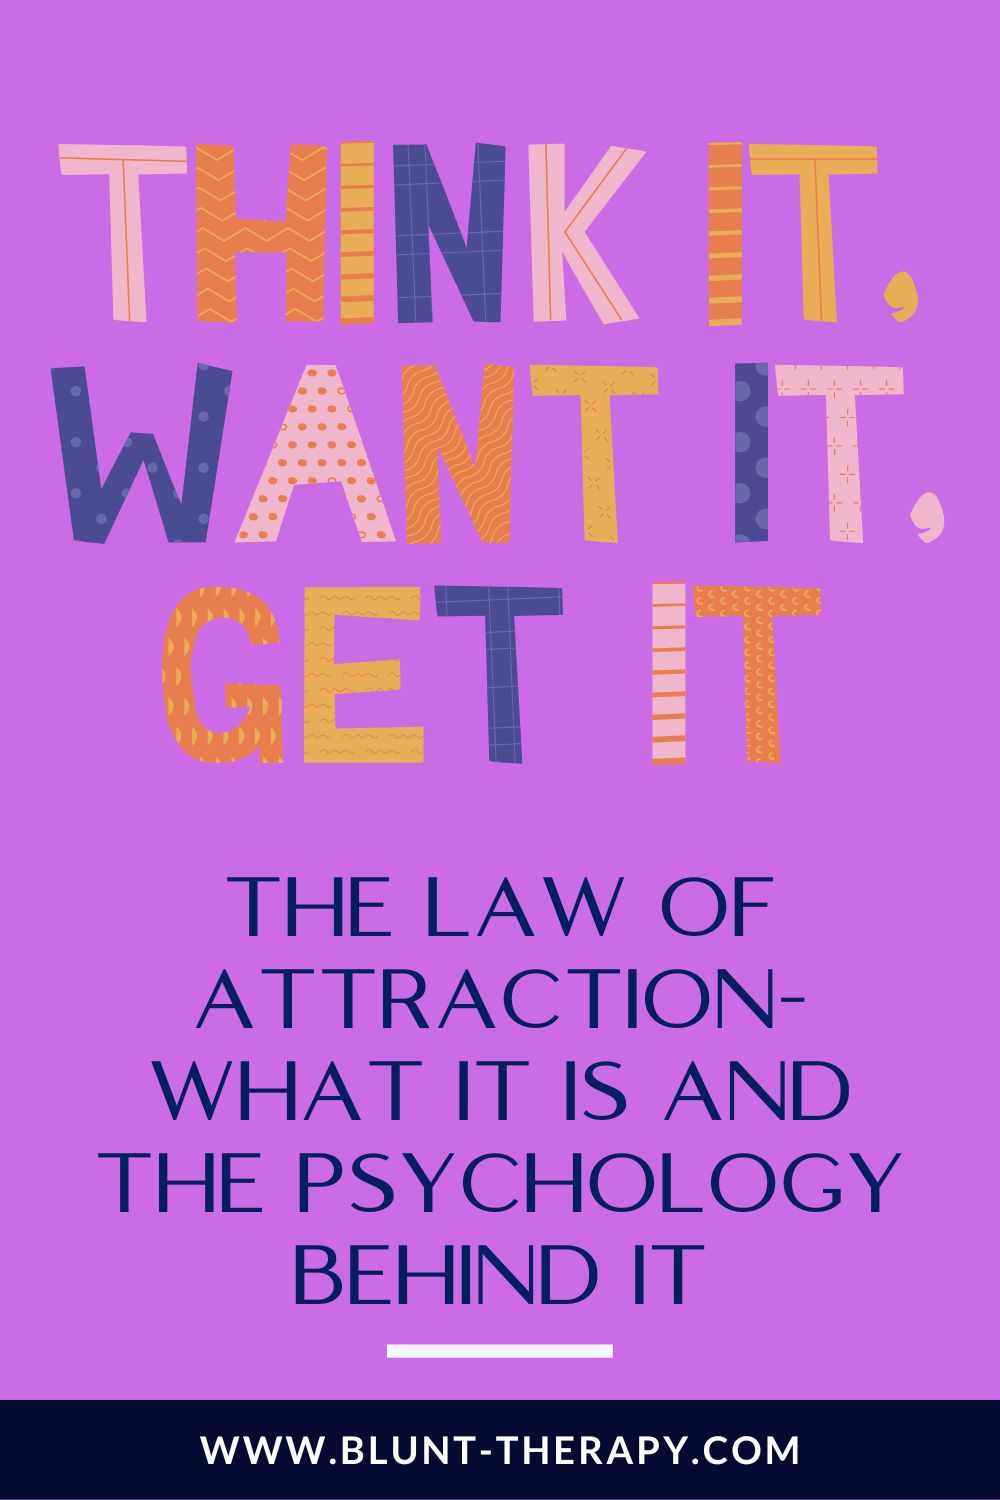 The Law of Attraction- What it is and the Psychology Behind it